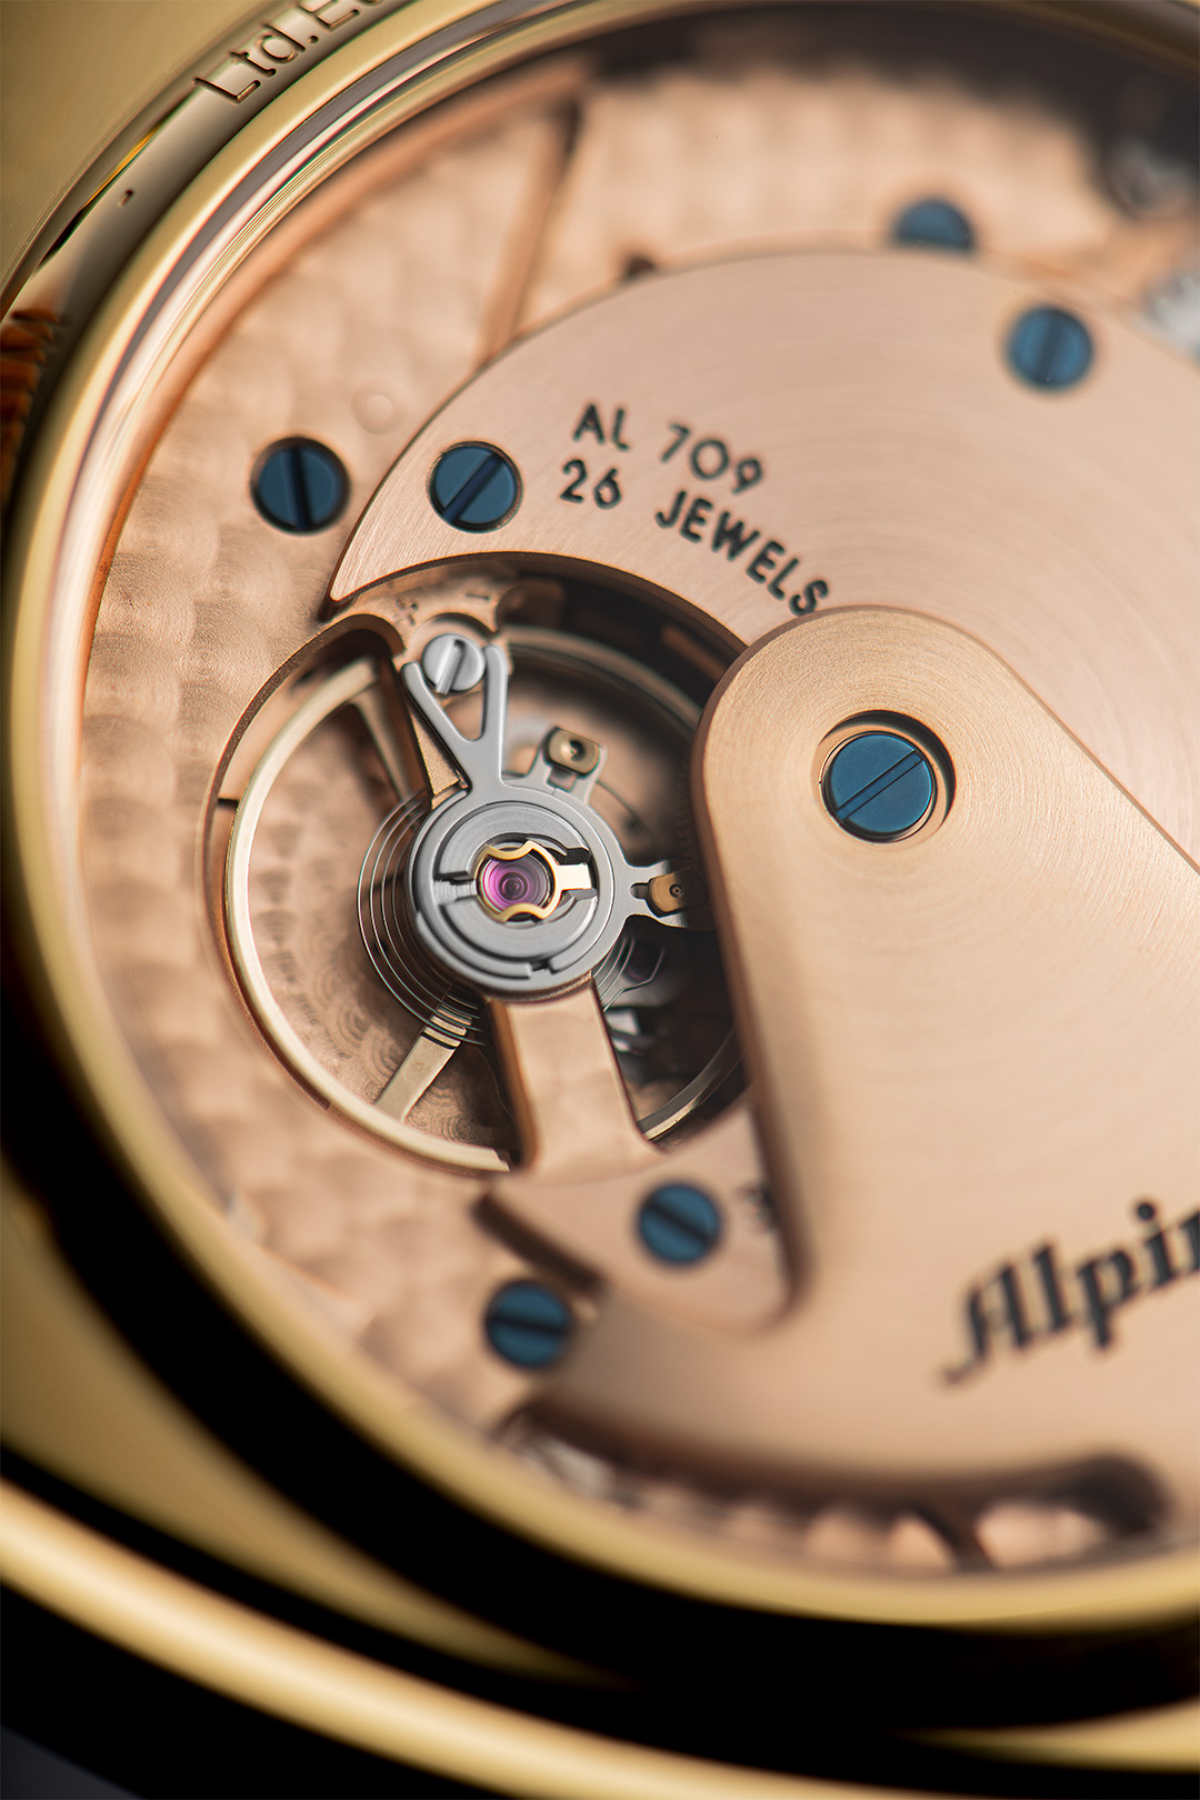 Alpina Develops Sixth Manufacture Calibre In Honour Of The Legendary 